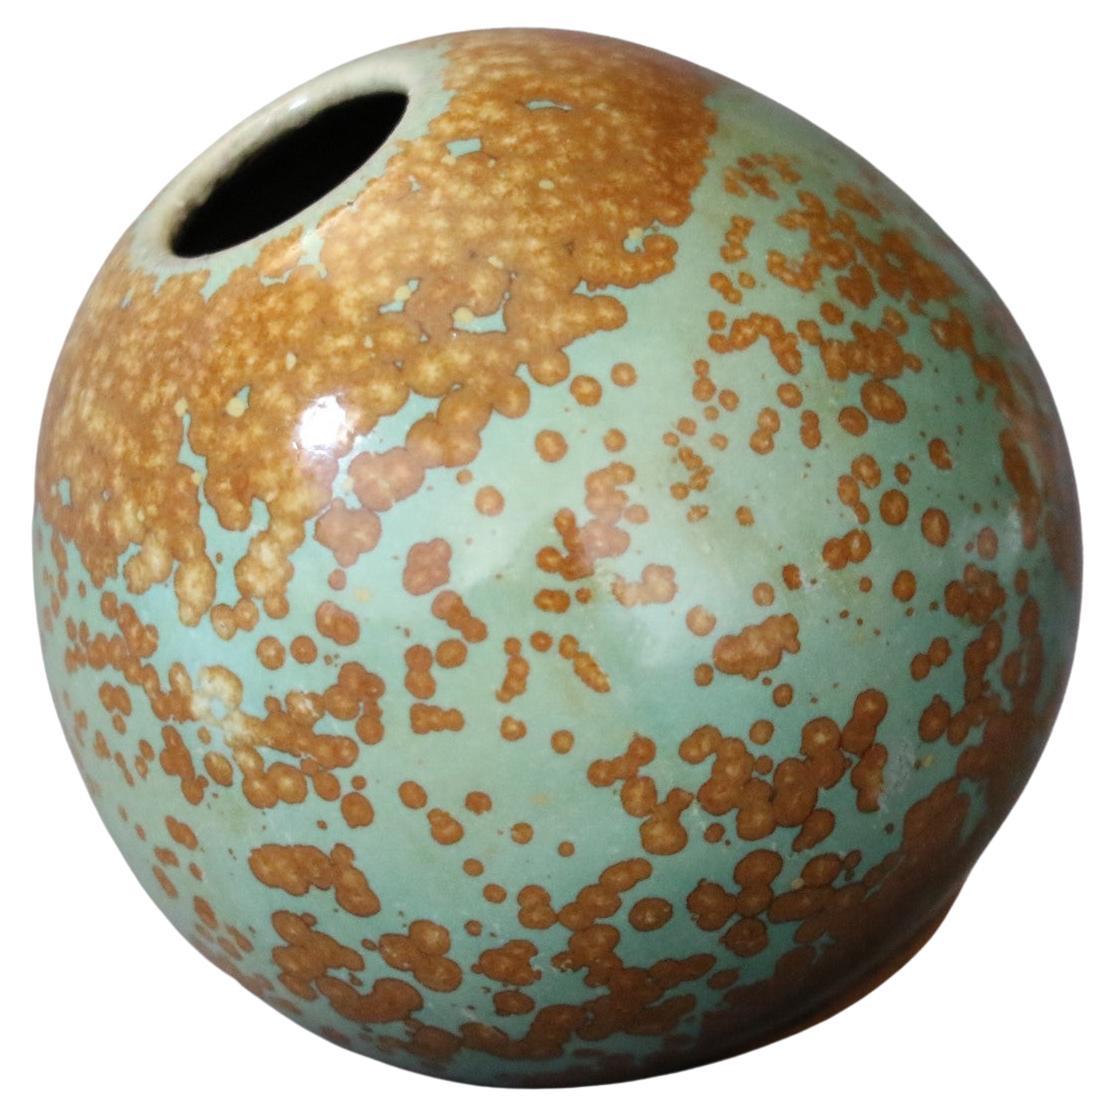 French Ceramic Ball Vase with Nucleations by Monique Cavallini - circa 2000 For Sale